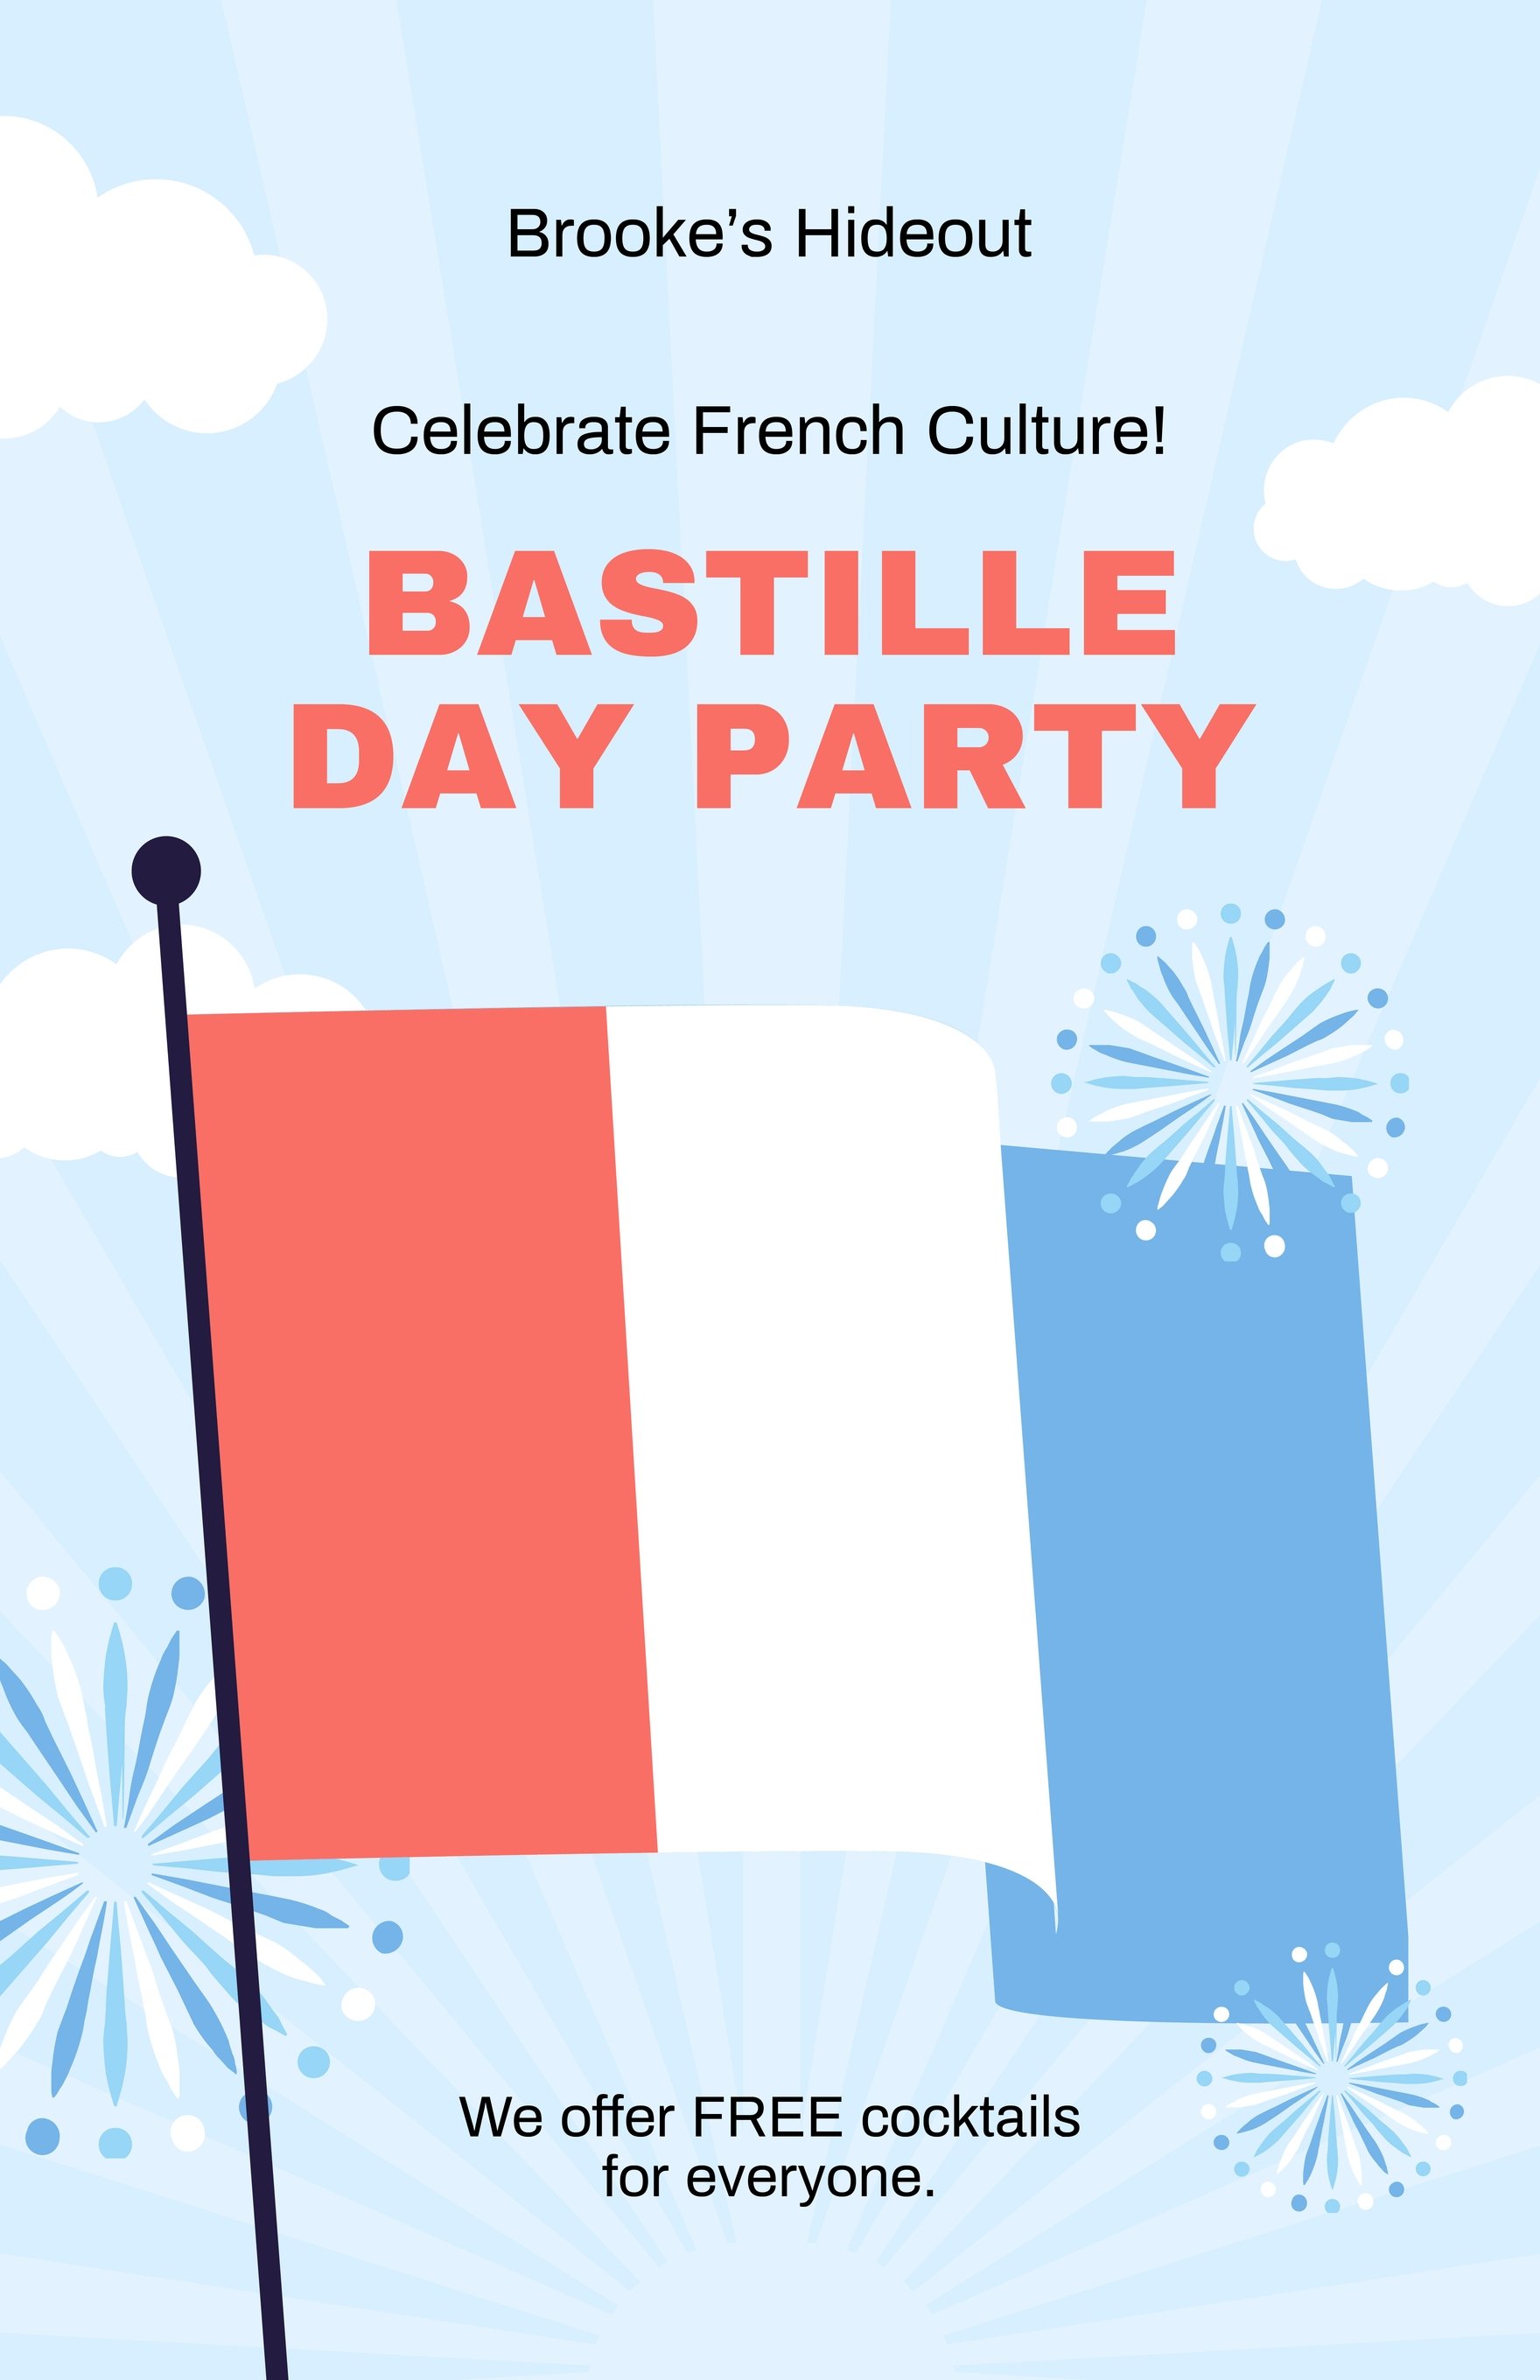 Free Bastille Day Party Poster in Word, Illustrator, PSD, Apple Pages, Publisher